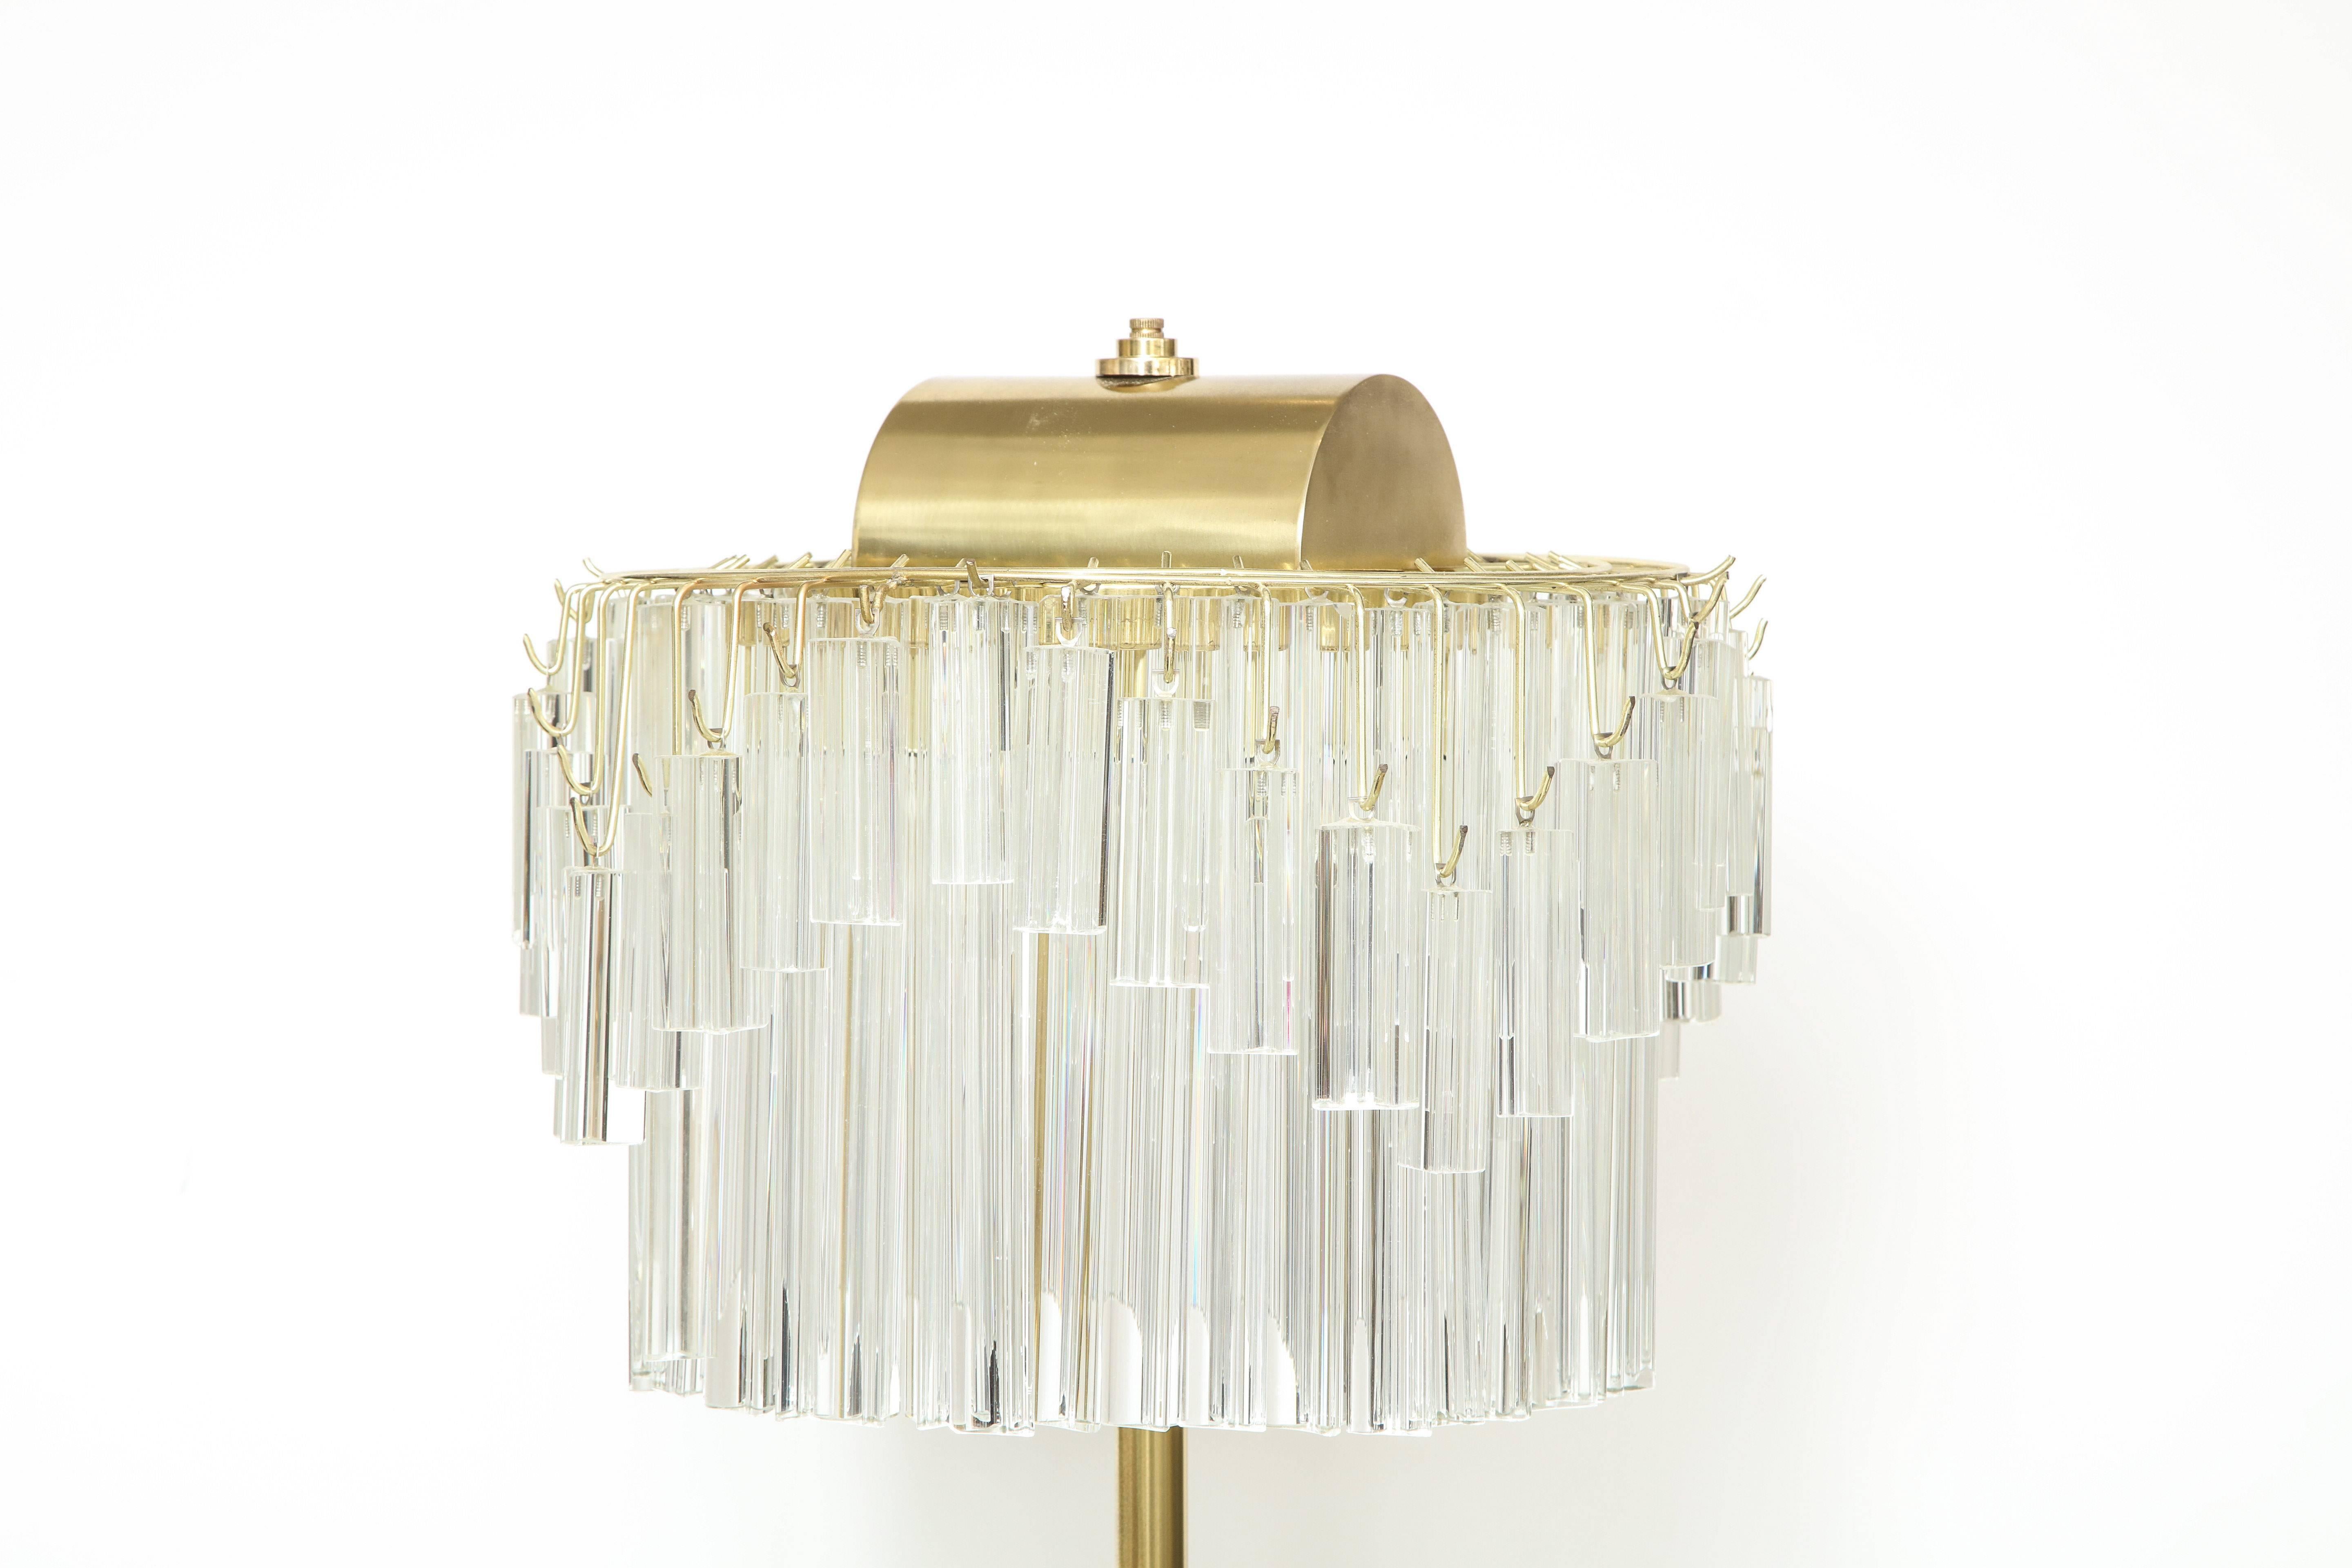 Venini crystal triedi prism floor lamp. Crystal body supported by a brass pole and white marble base. Floor lamp utilizes six light sources using candelabra type bulbs. Rewired for use in the USA. Originally a special order and sold thru Camer